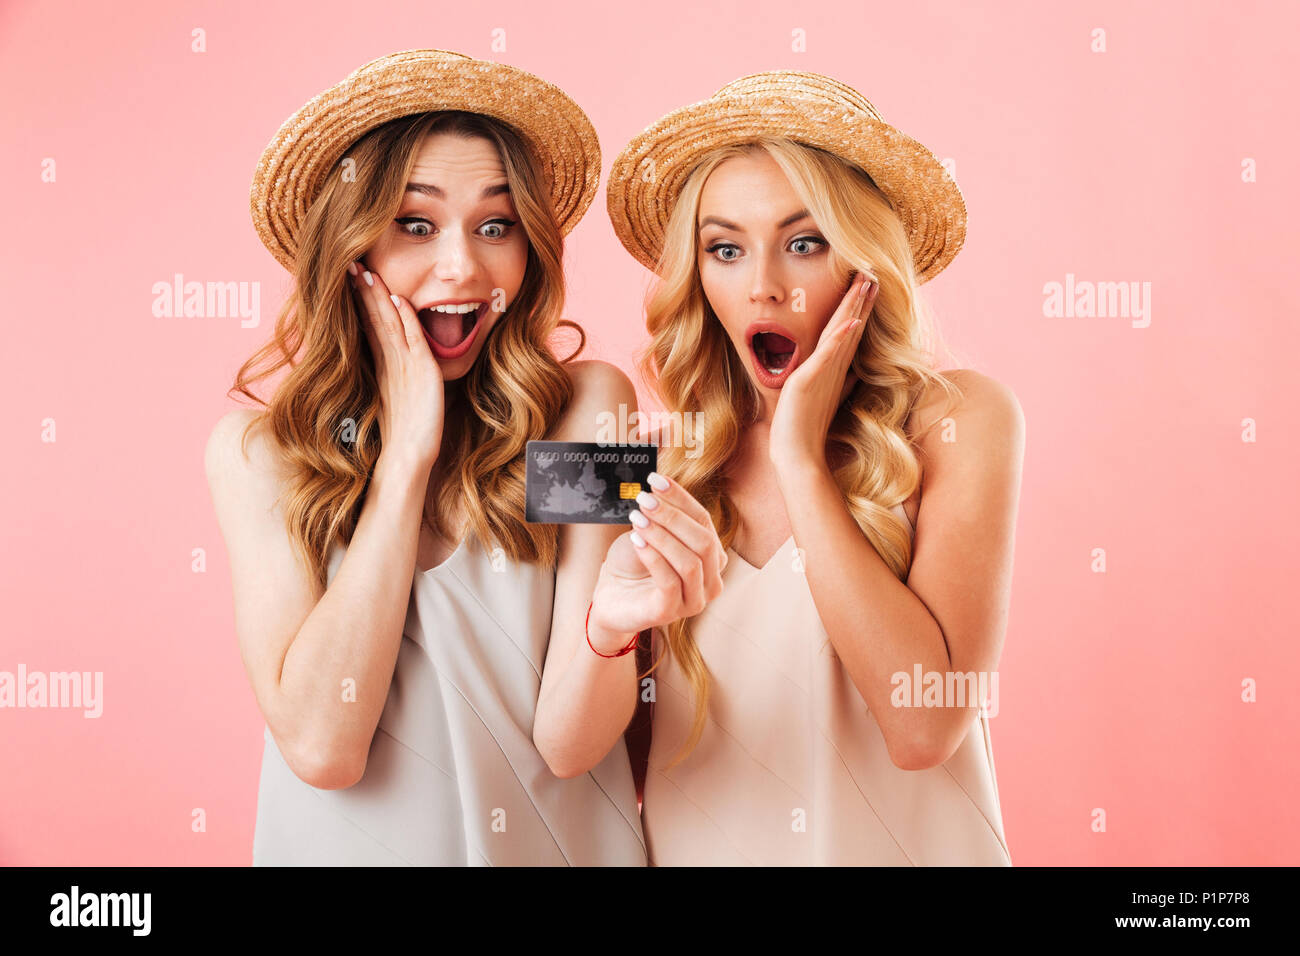 Portrait of two excited young women in summer clothes looking at plastic credit card isolated over pink background Stock Photo